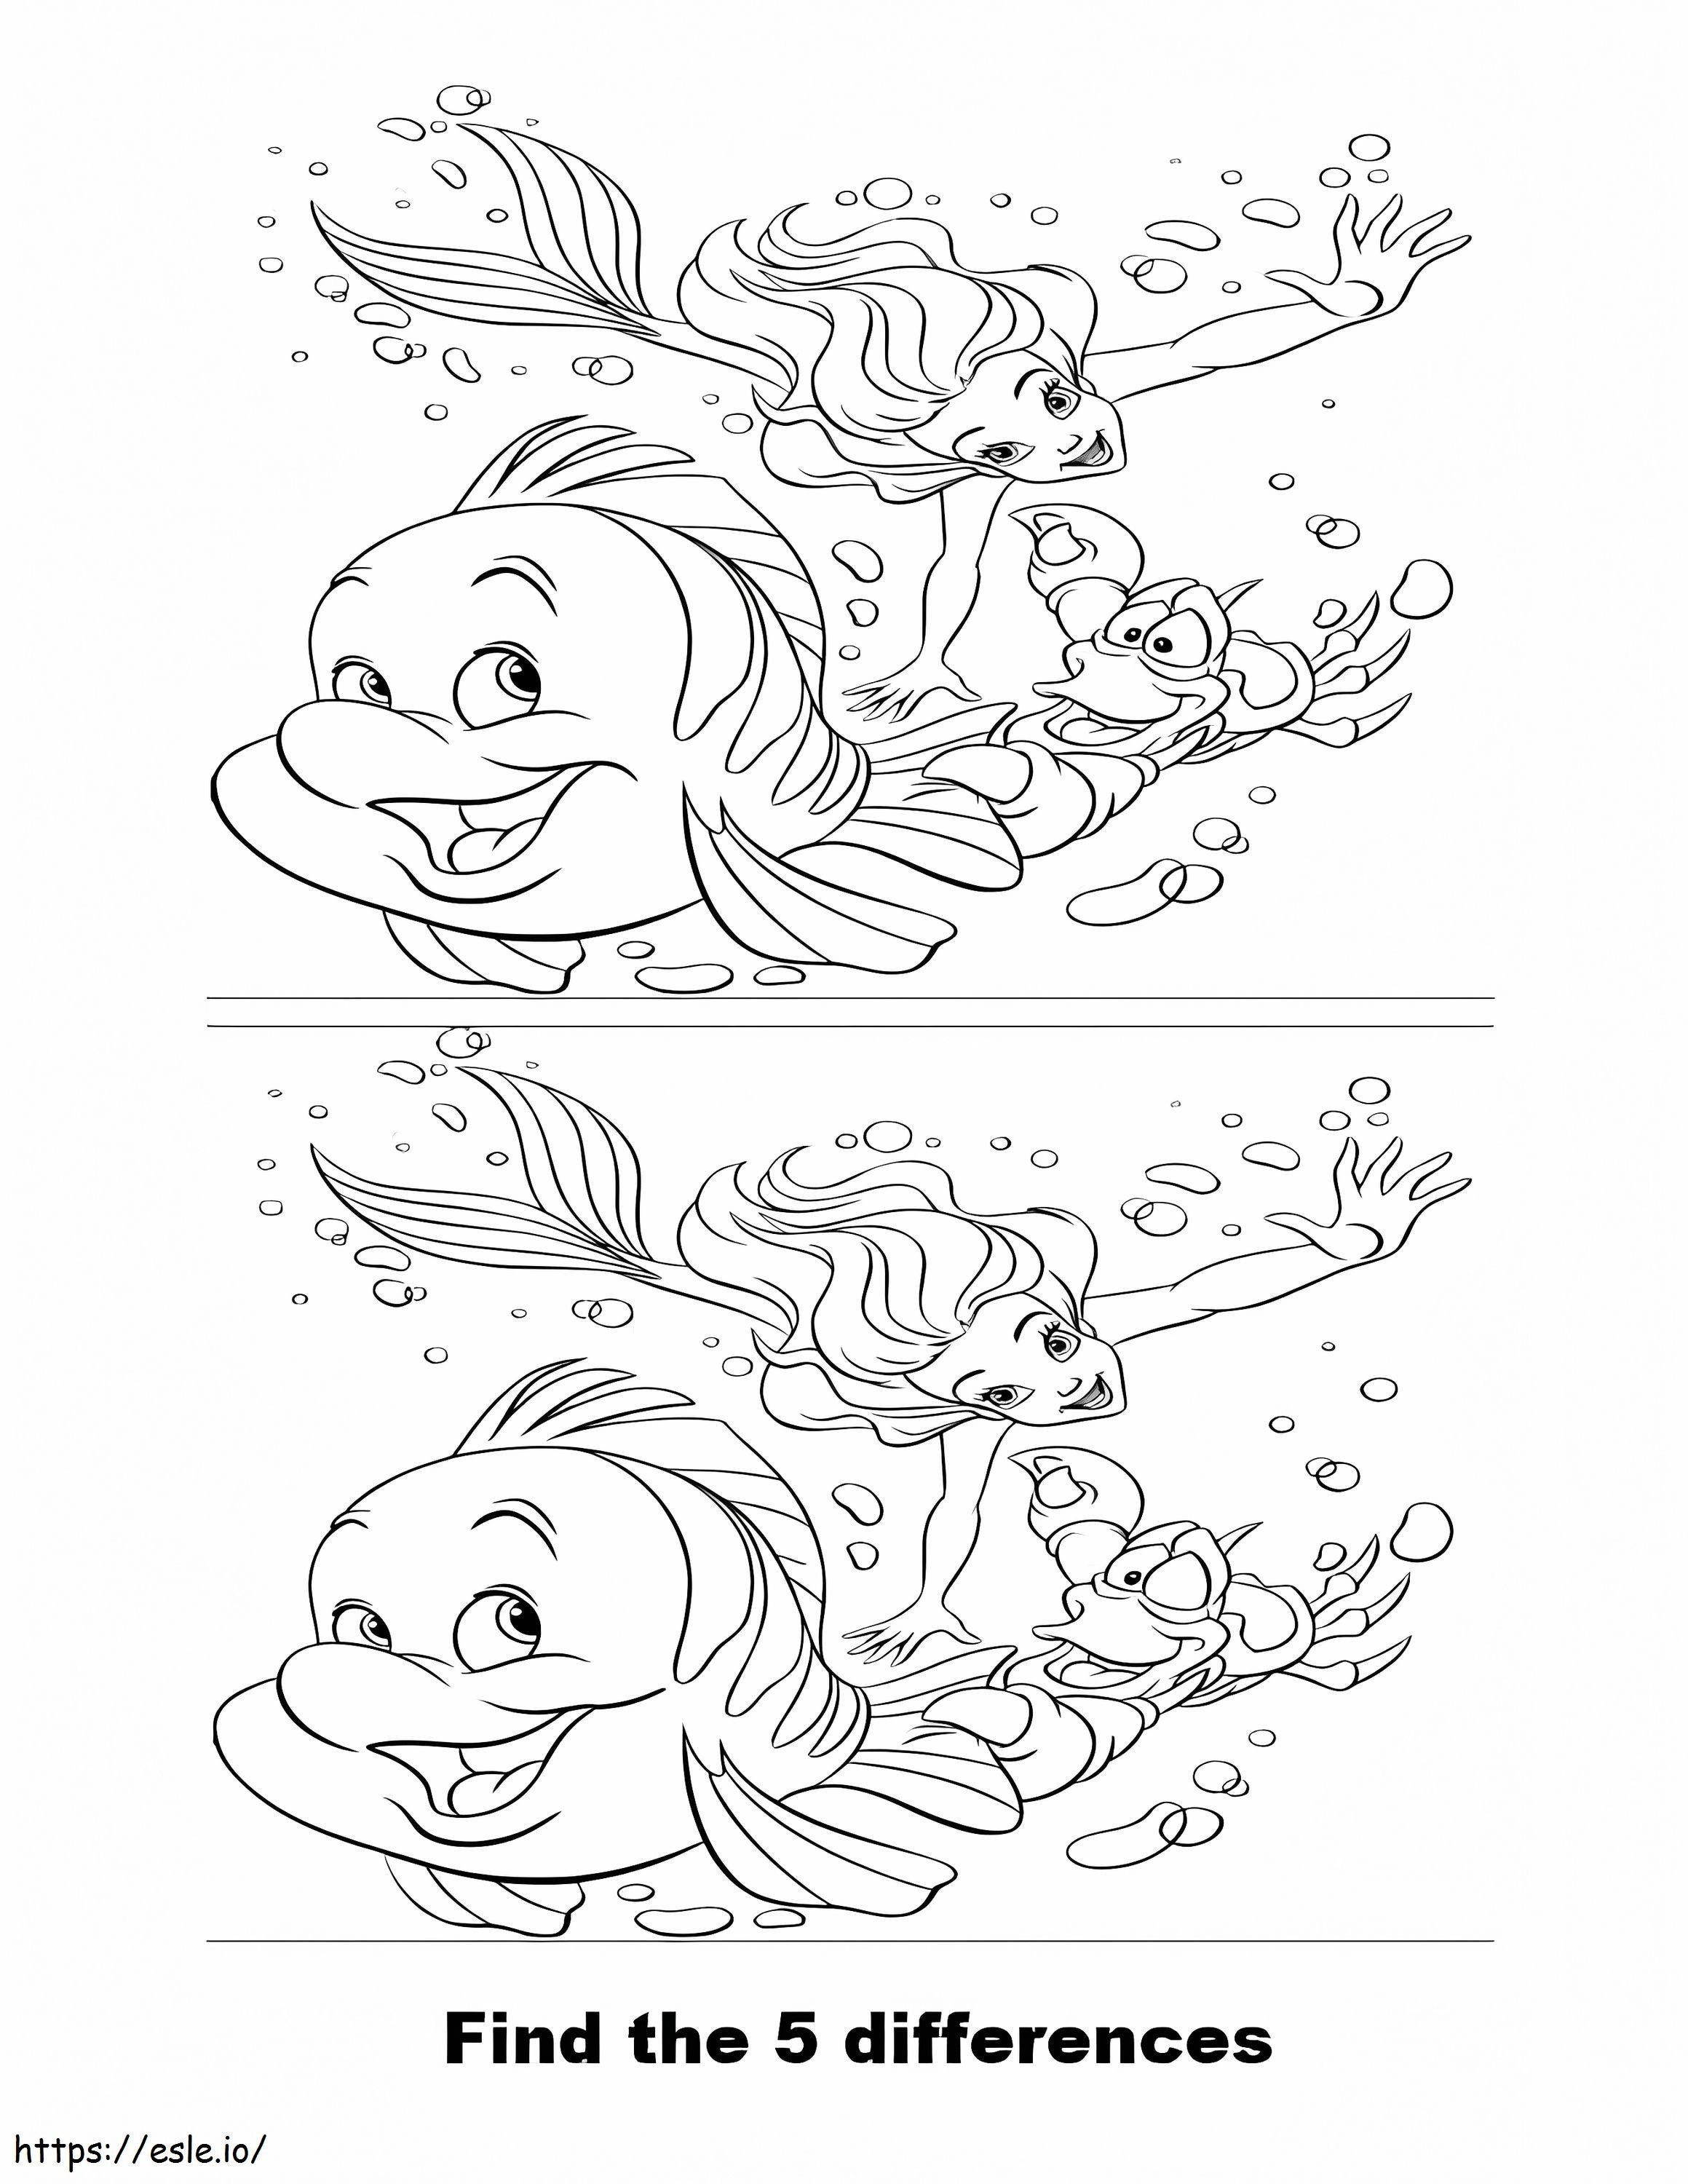 Printable Find 5 Differences coloring page